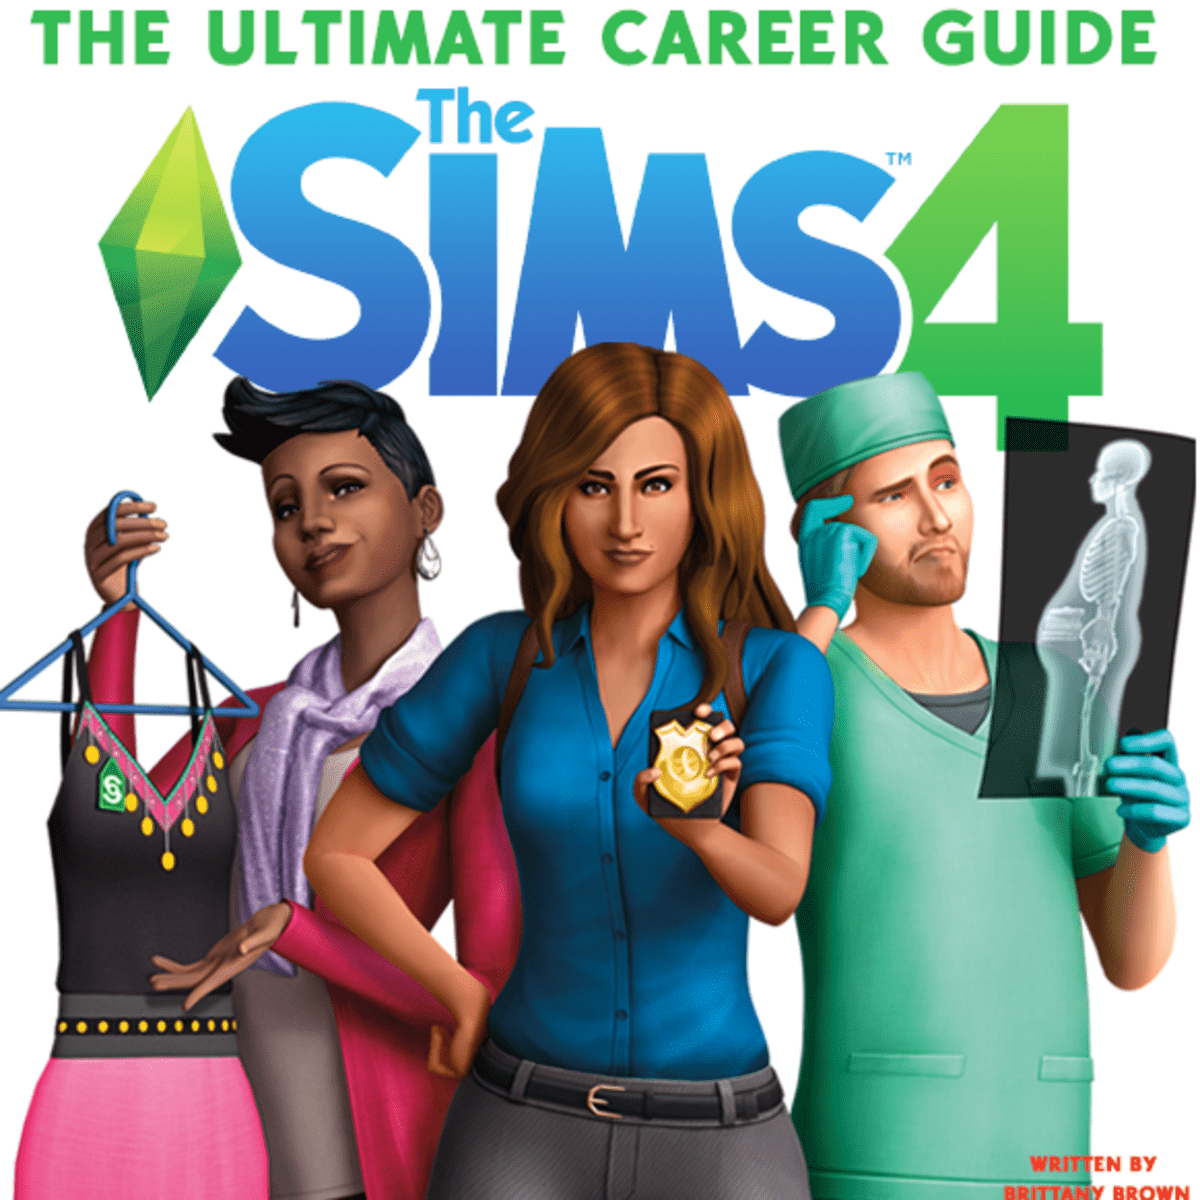 genetically bound Becks The Ultimate "Sims 4" Career Guide! - LevelSkip